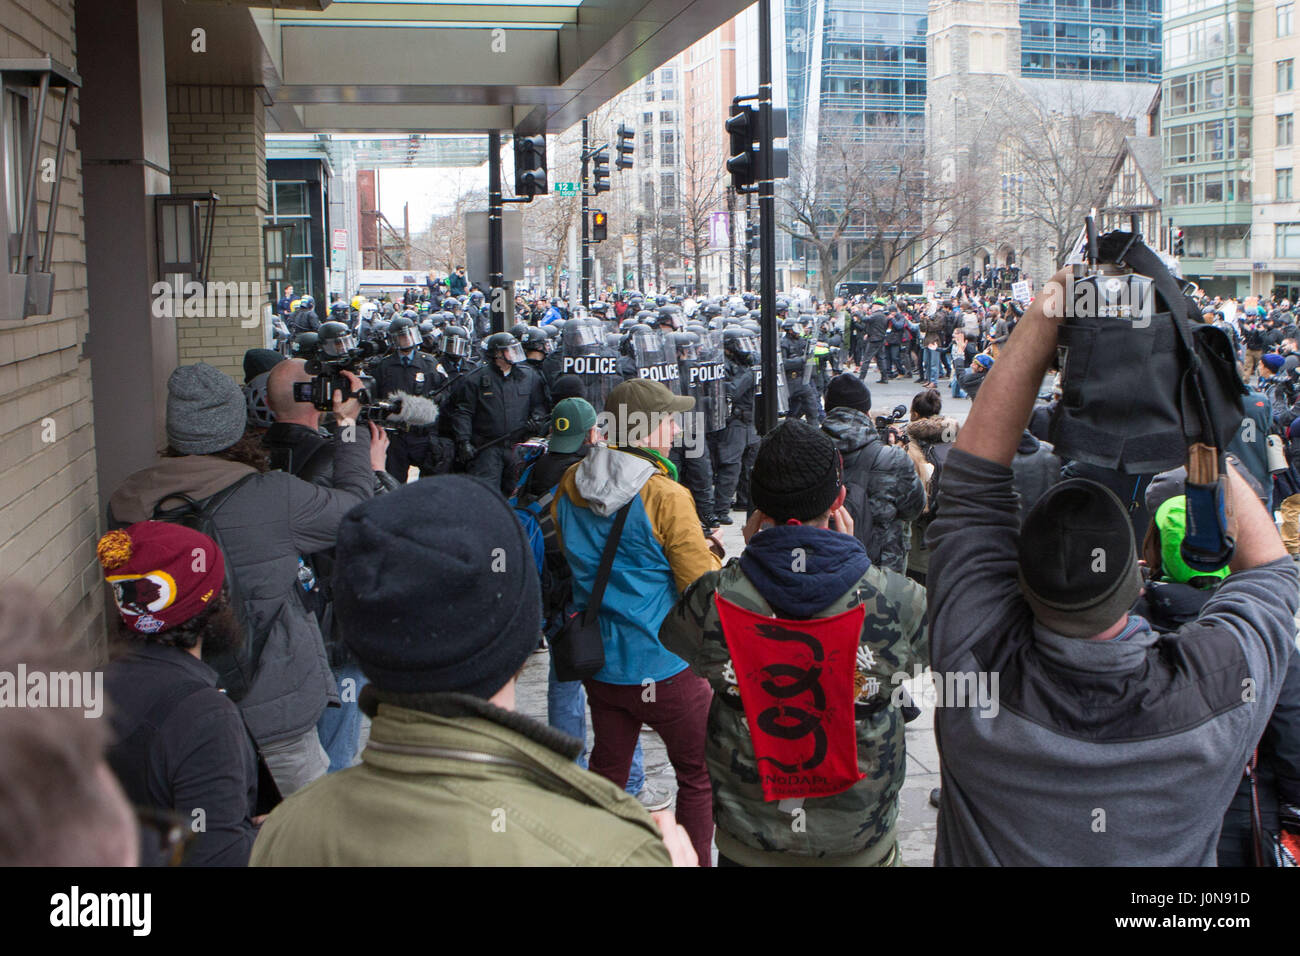 Washington, Distric Of Columbia, USA. 20th Jan, 2017. Protesters and police clash in Washington, DC during the inauguration of President DONALD TRUMP. Credit: Alex Edelman/ZUMA Wire/Alamy Live News Stock Photo